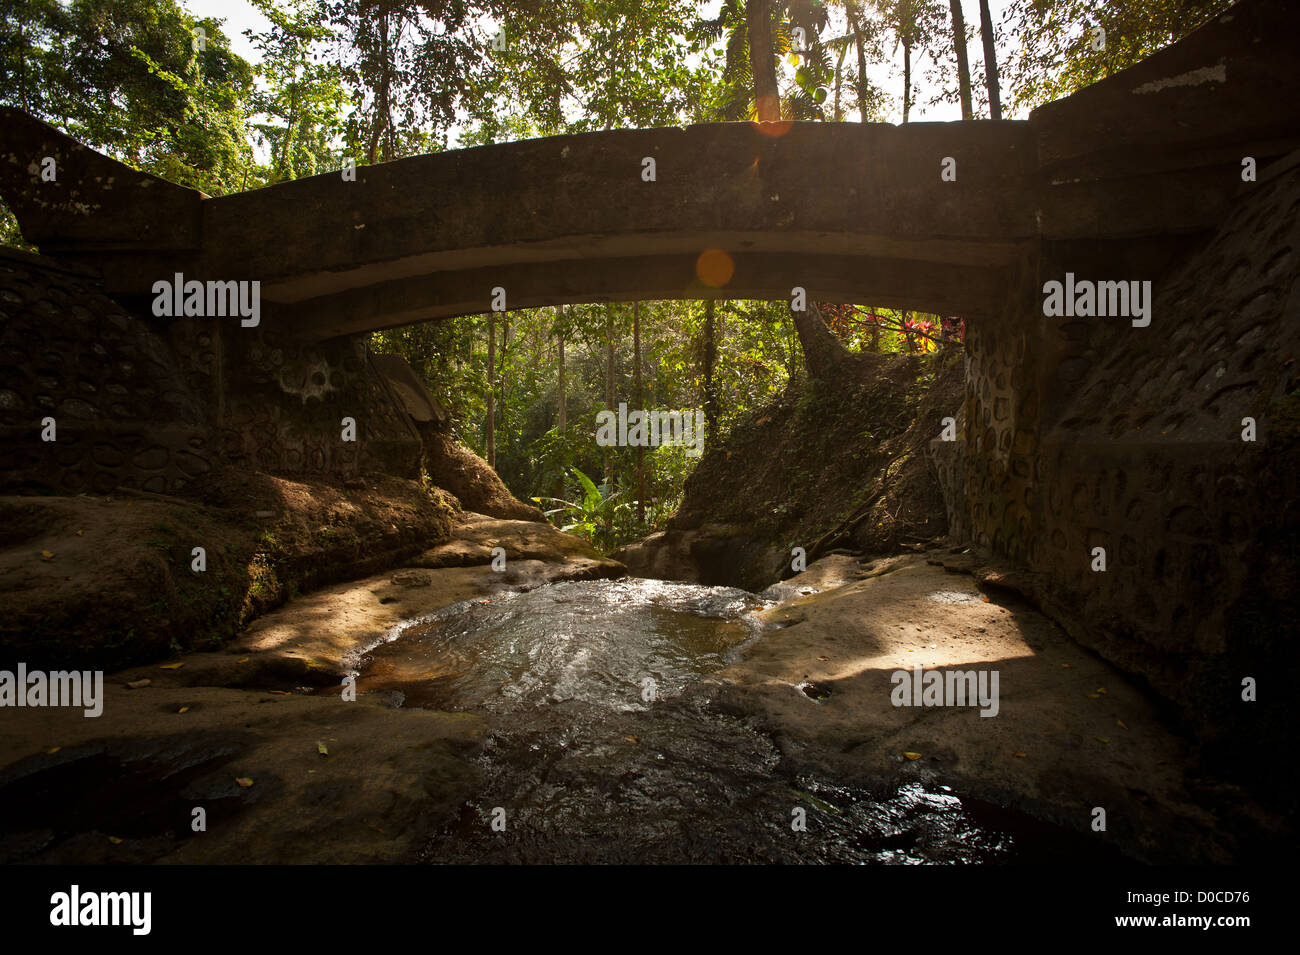 Ancient Balinese bridge on top of small river in the forest in Goa Gajah location , Bali , Indonesia Stock Photo